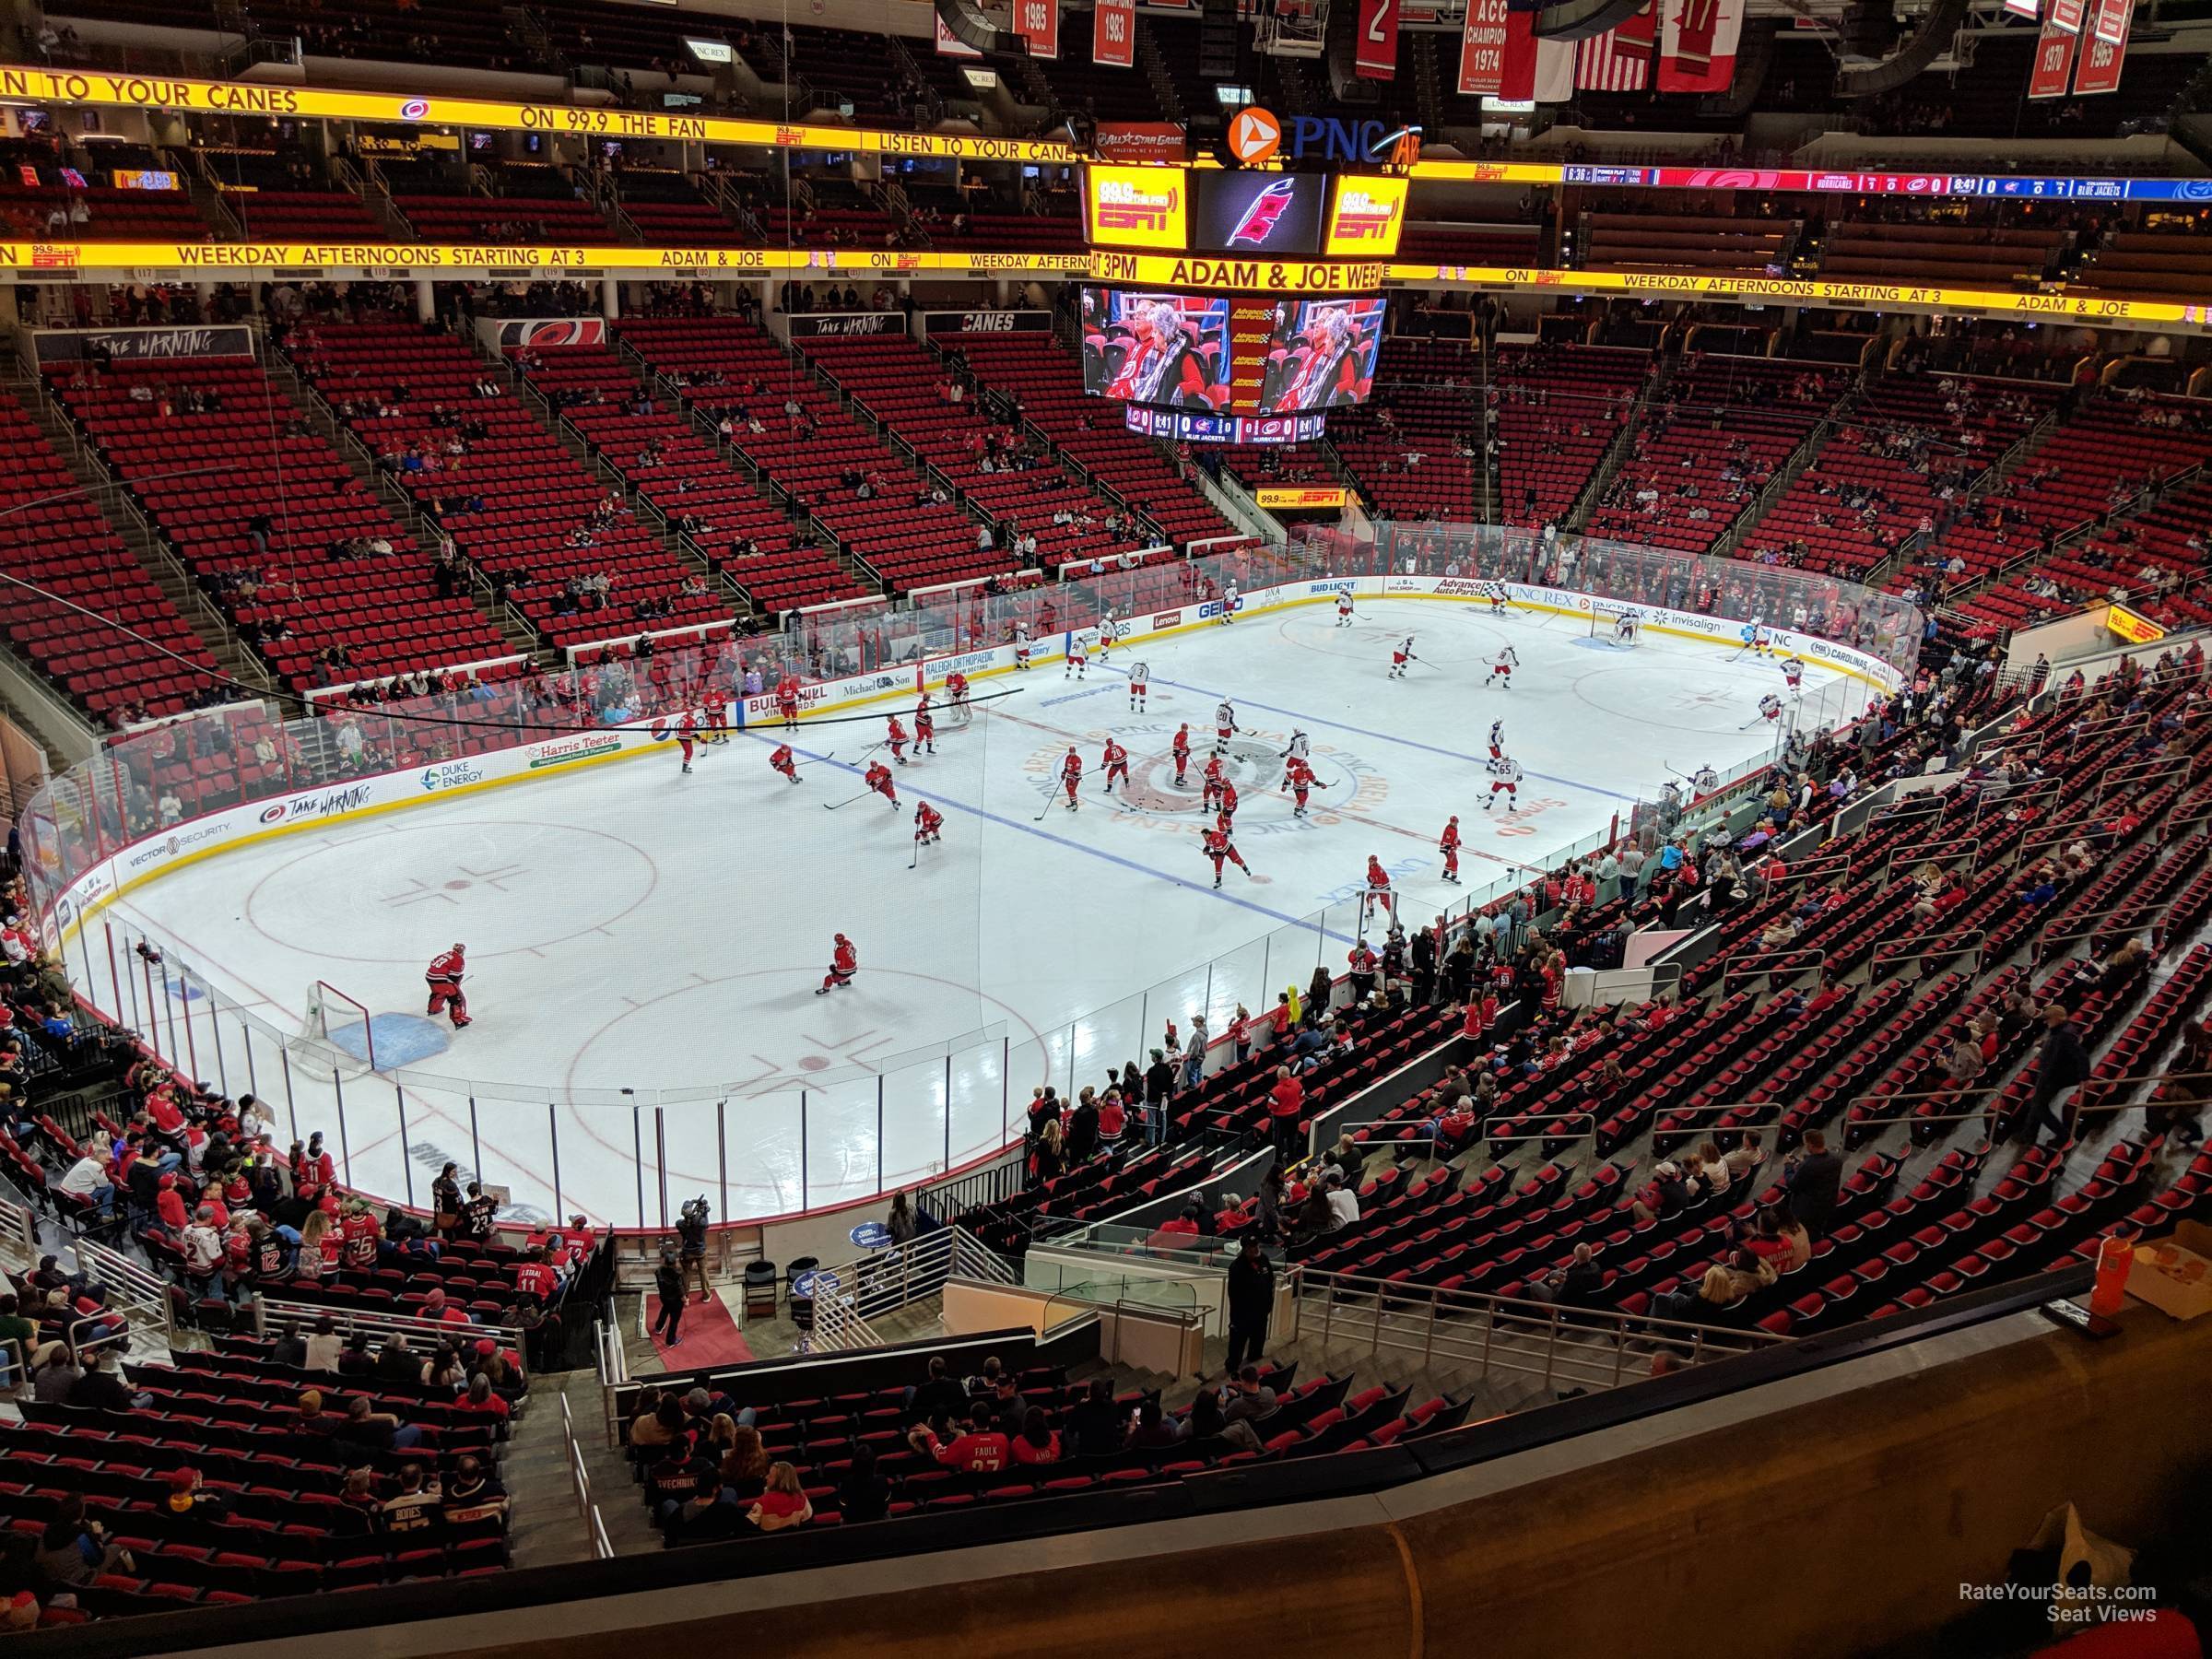 section 208, row d seat view  for hockey - pnc arena